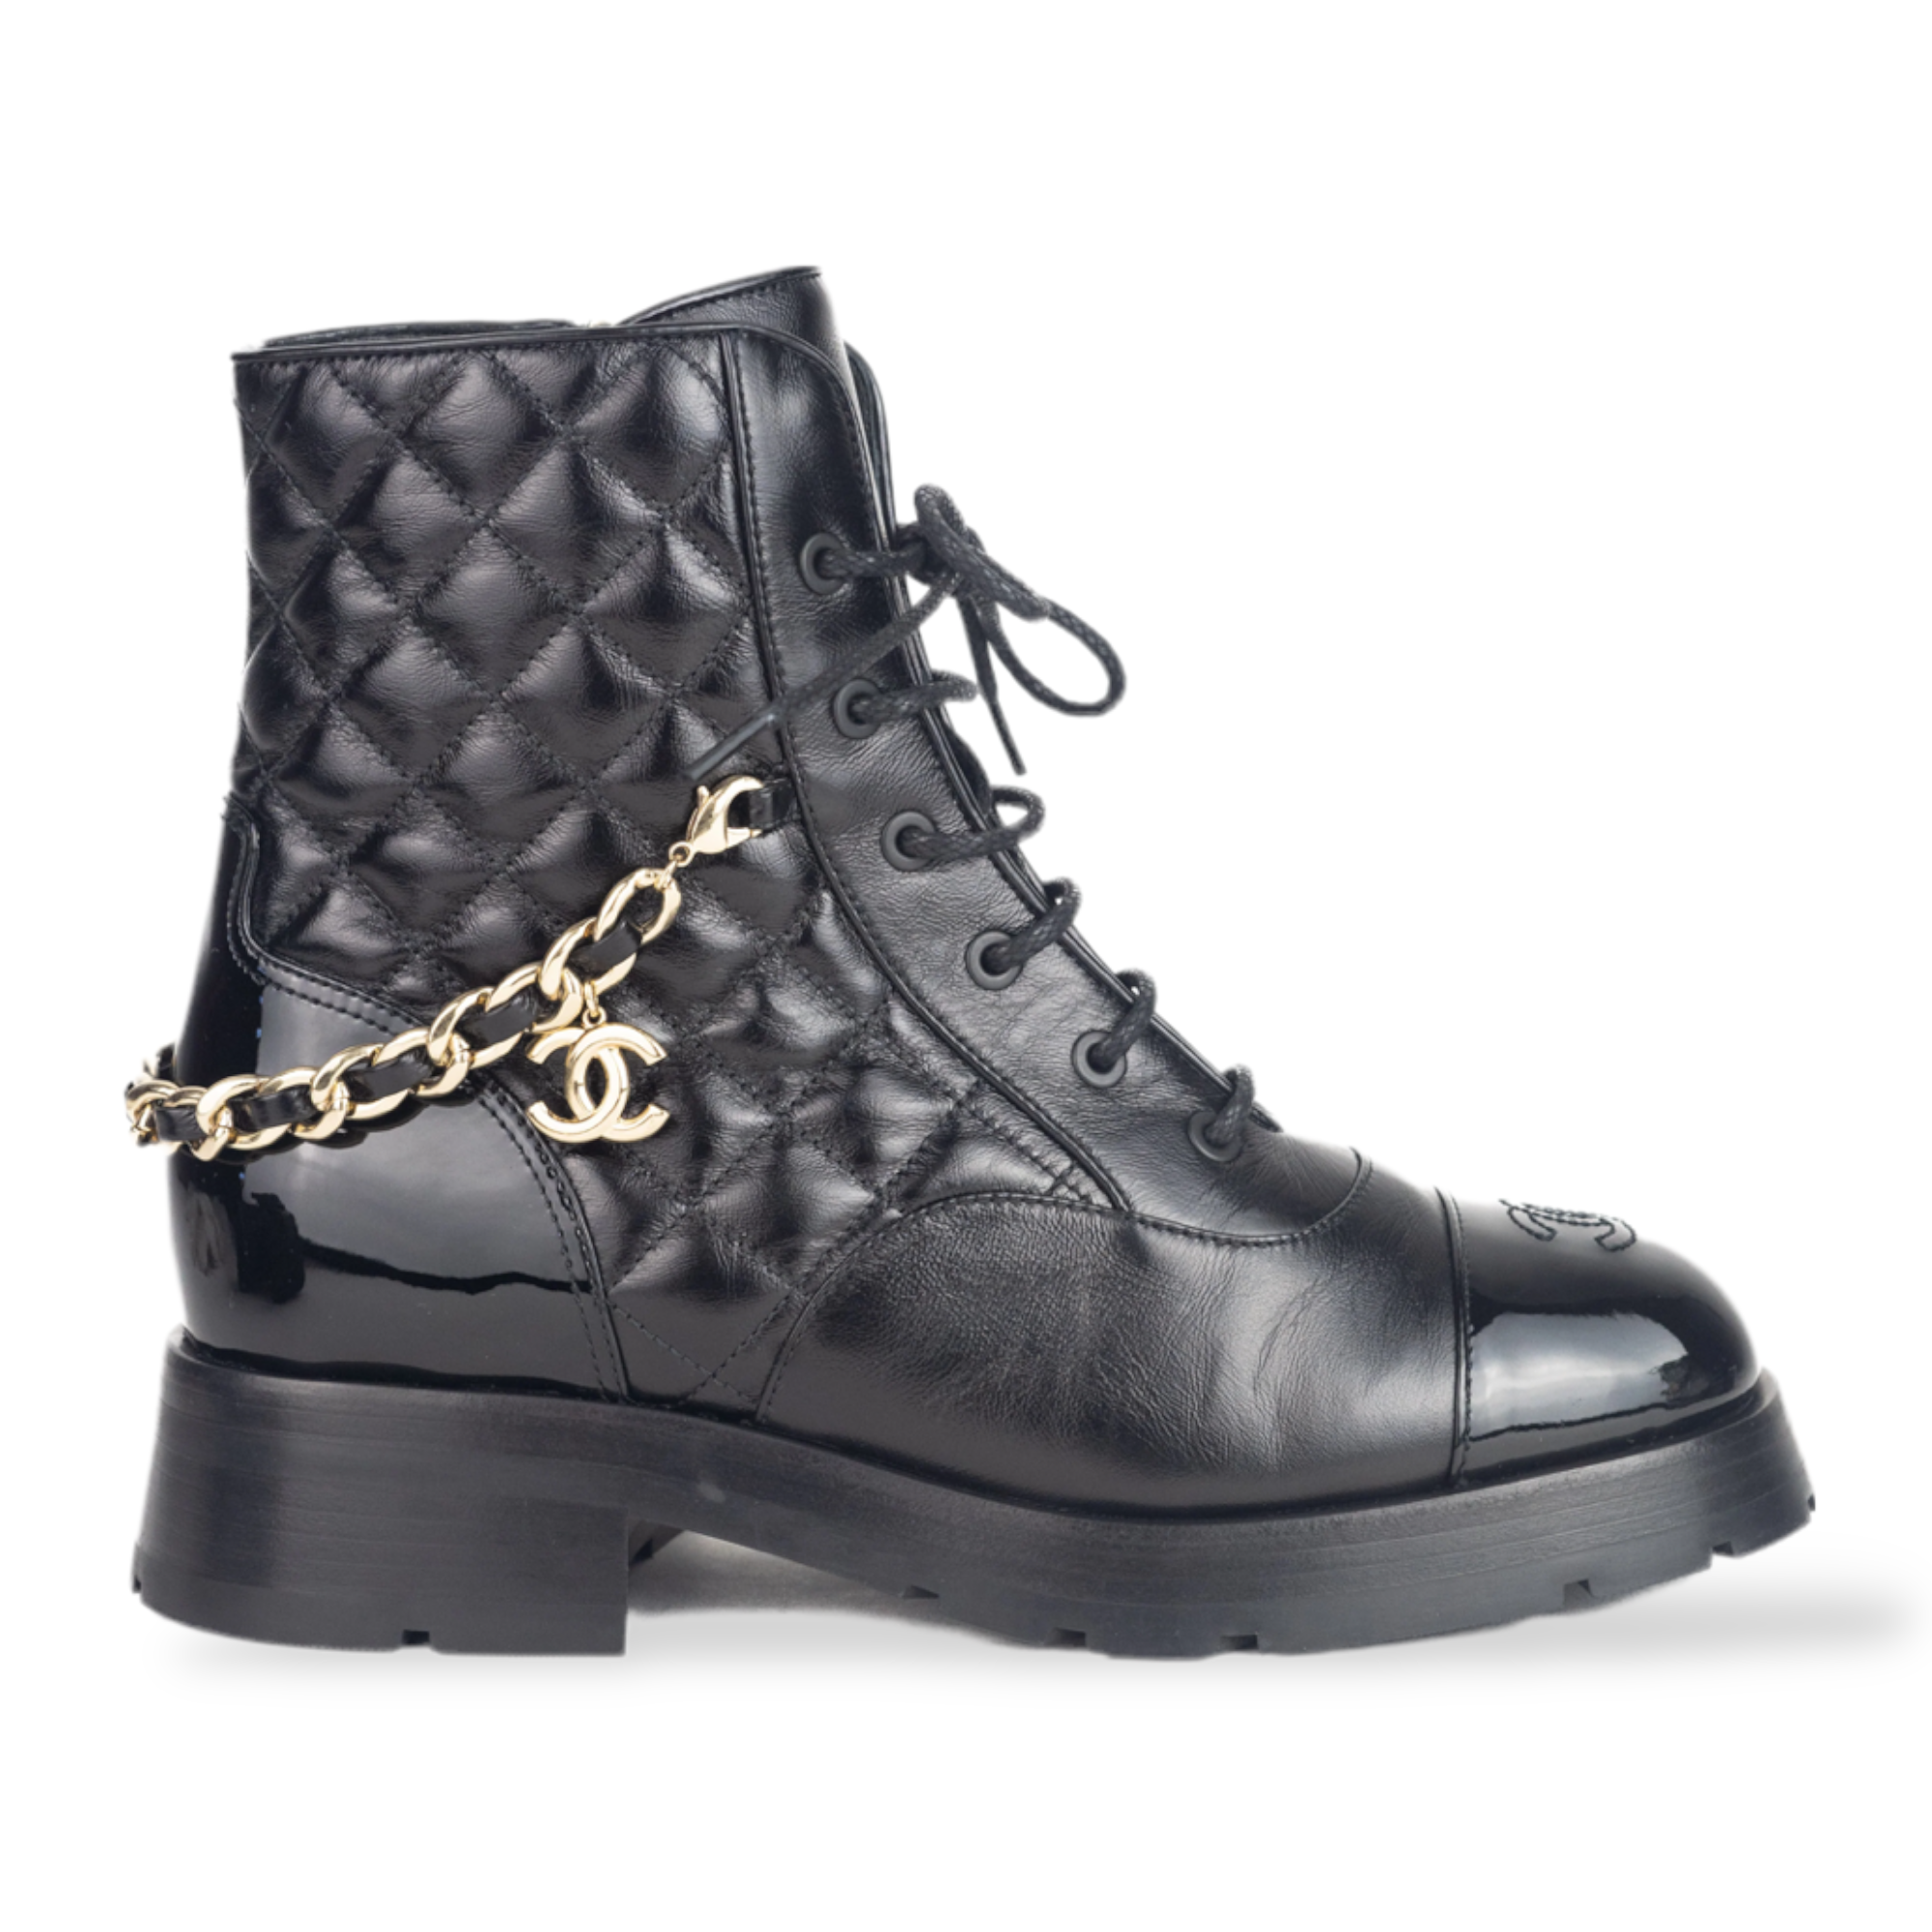 CHANEL, Shoes, Chanel 22b223 New Tag Classic Black Leather Boots Gold Cc  Chain Eu39 Us89